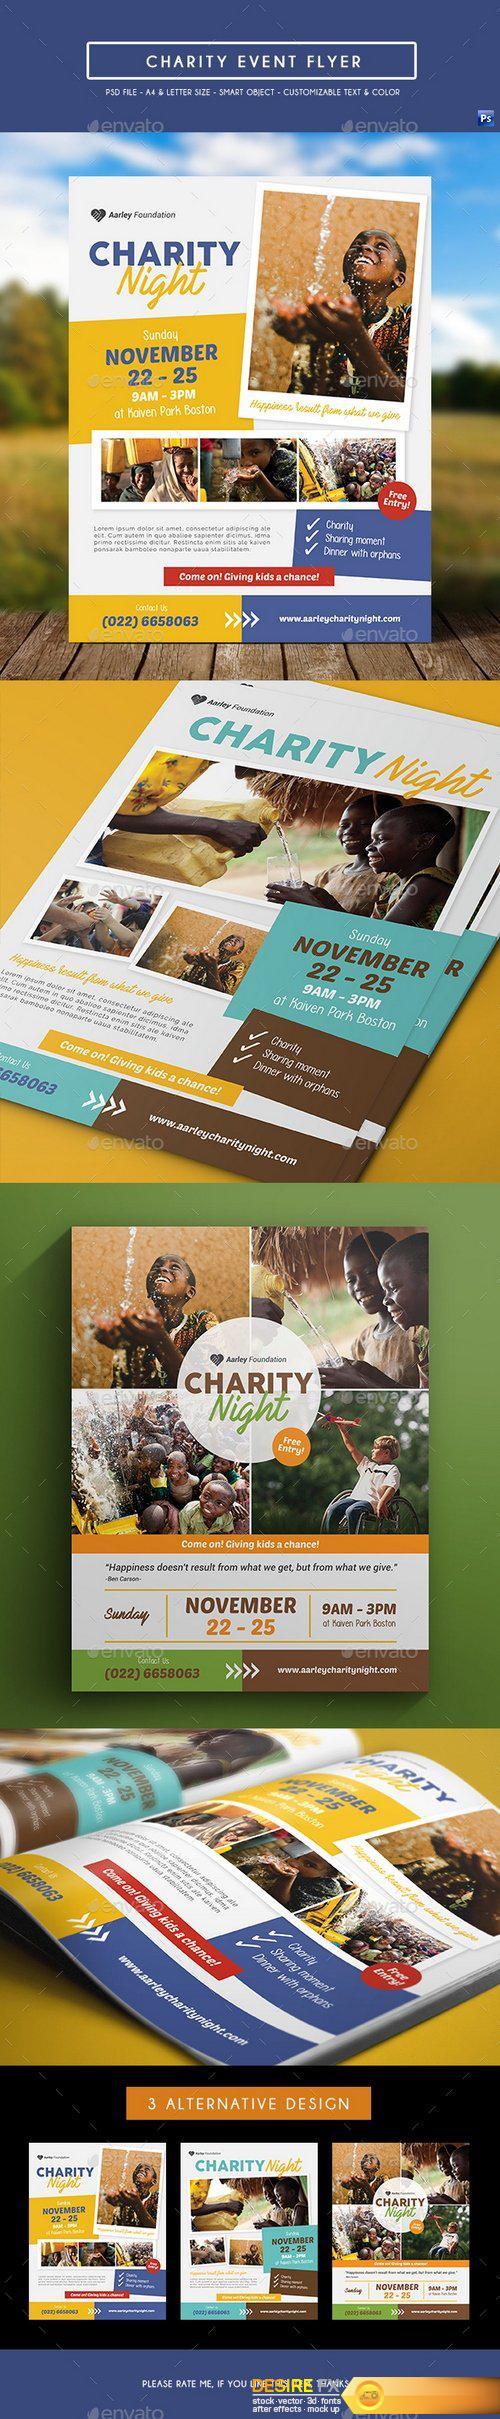 Graphicriver - Charity Event Flyer 19076696